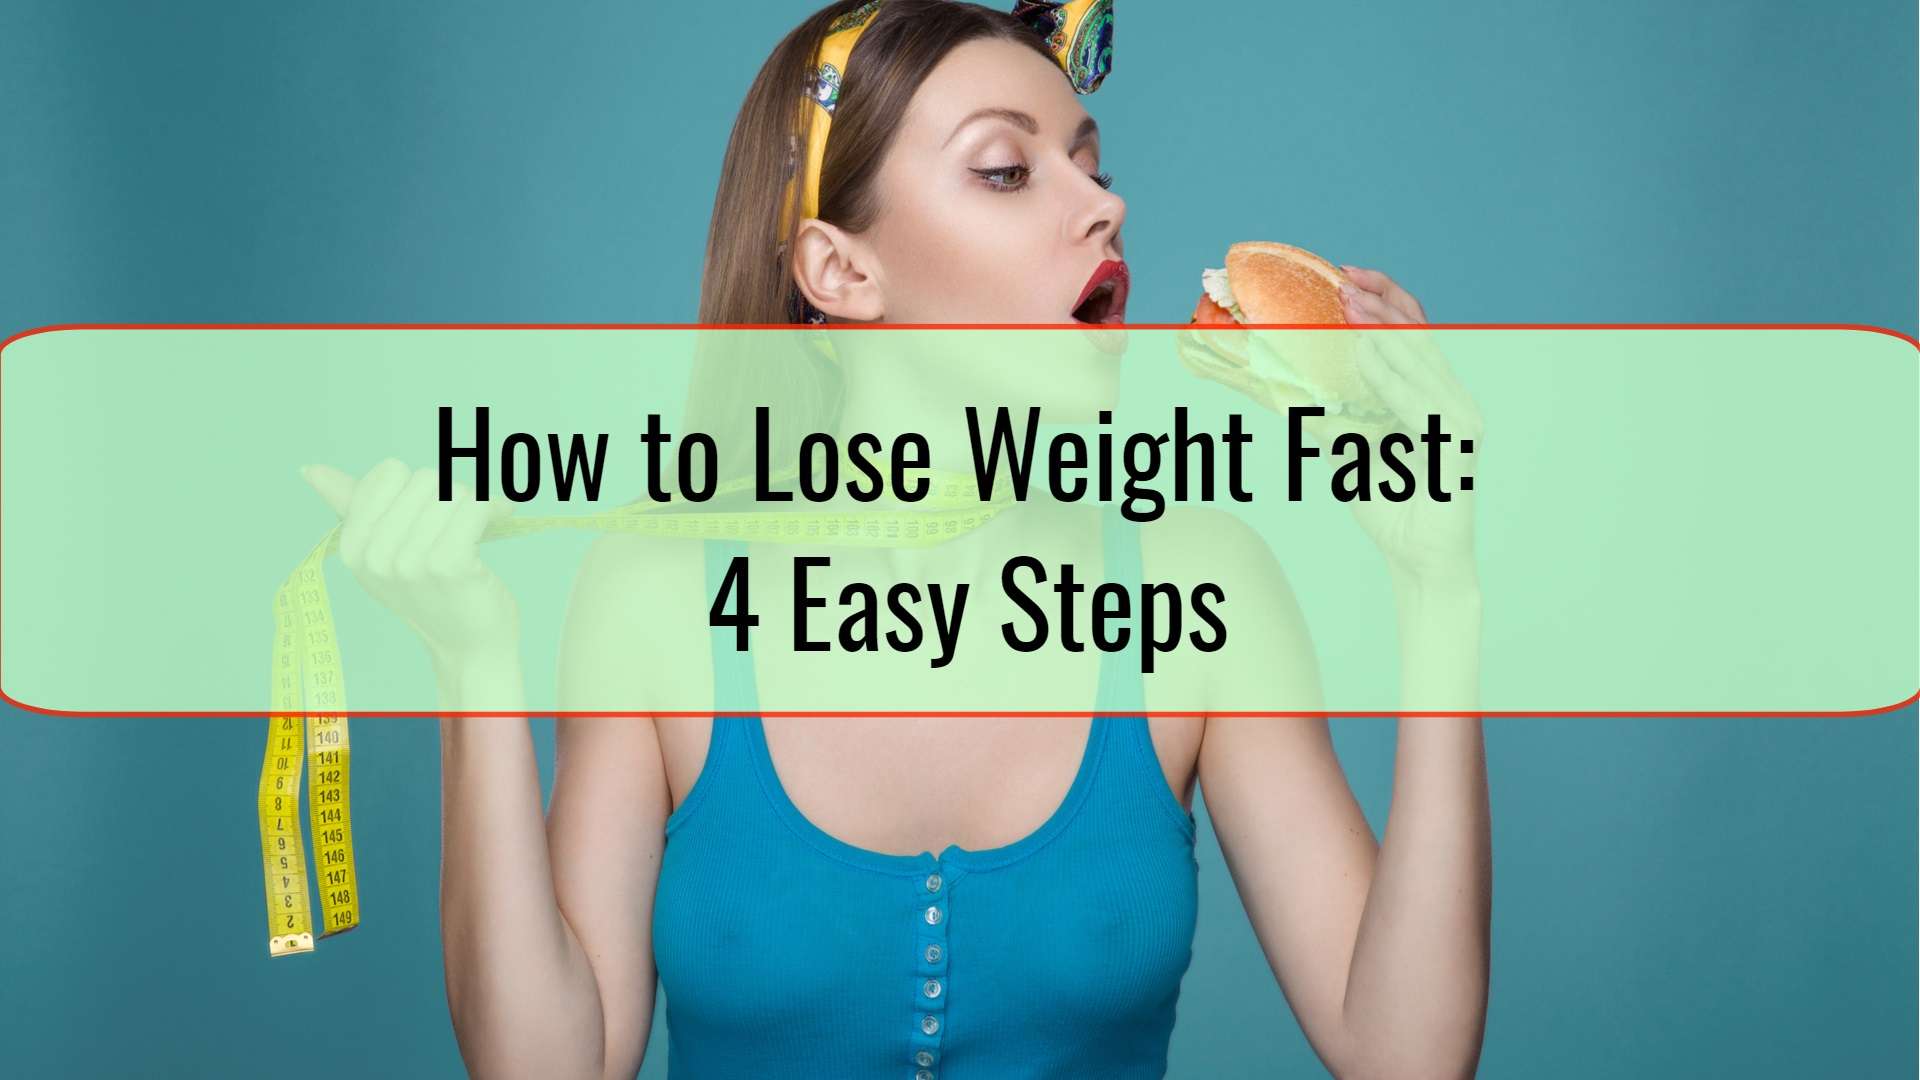 How to Lose Weight Fast: 4 Easy Steps â¢ Health blog